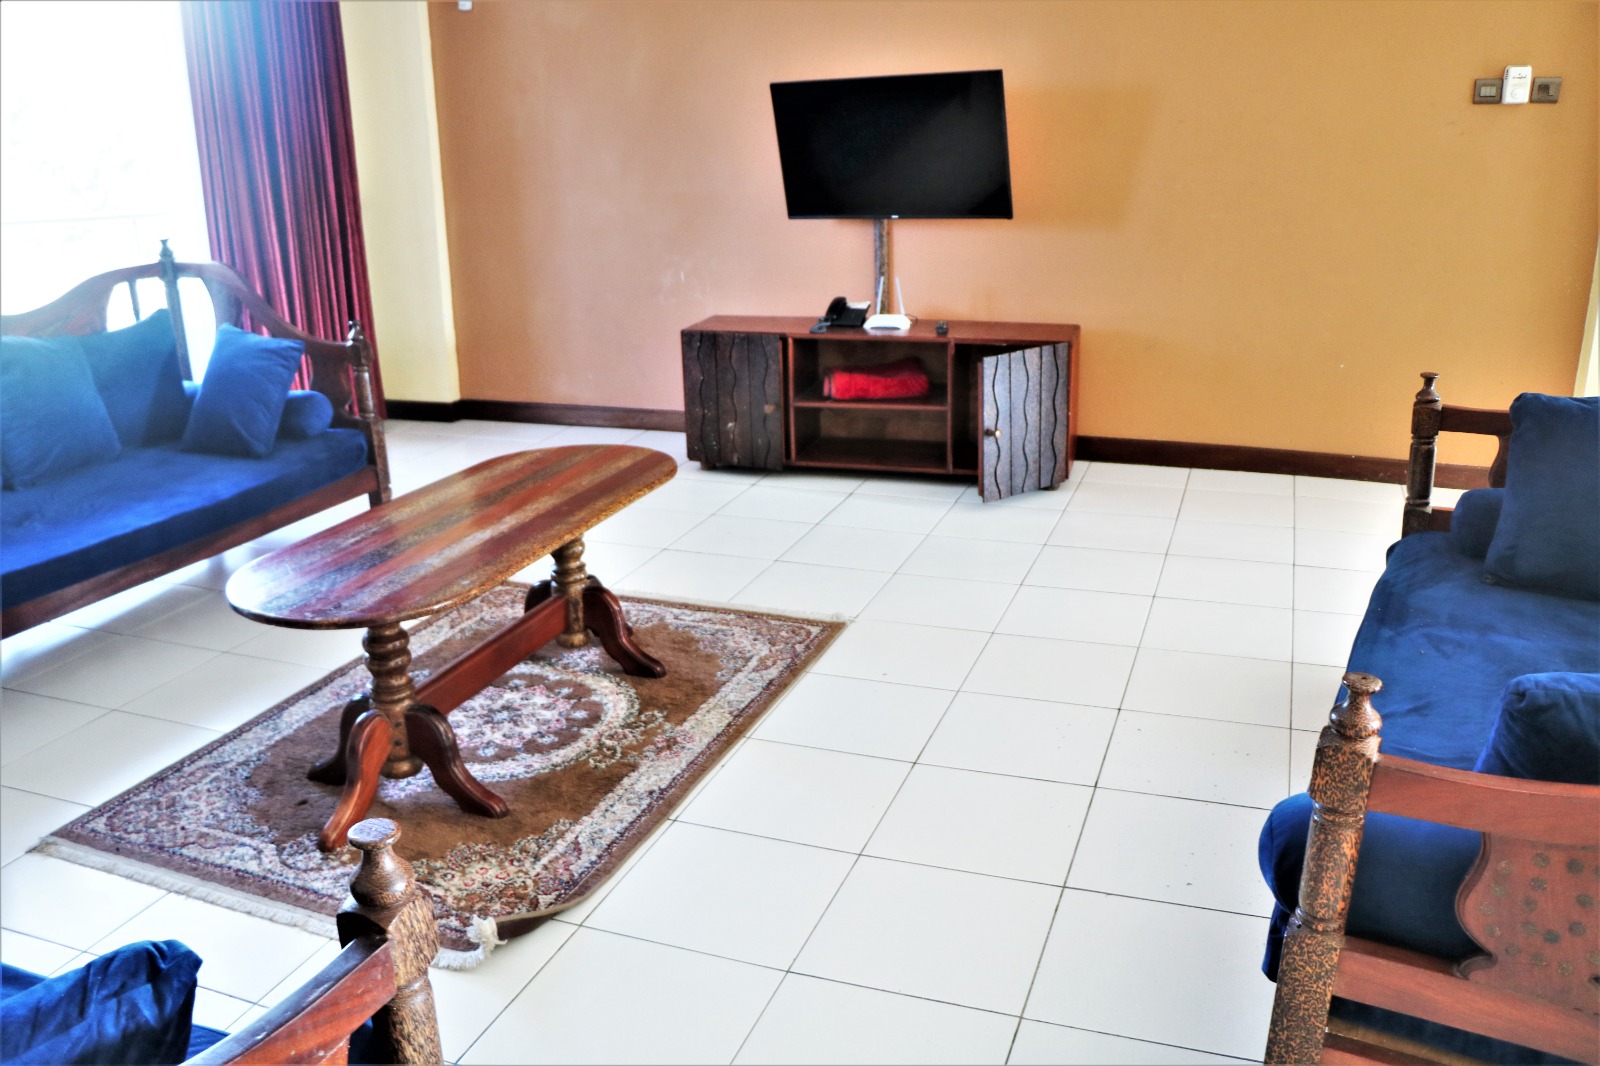 Beach front 2bedroom vacation apartment in Mombasa. Affordable furnished Hotel for vacation in Mombasa | Zuru Life Africa